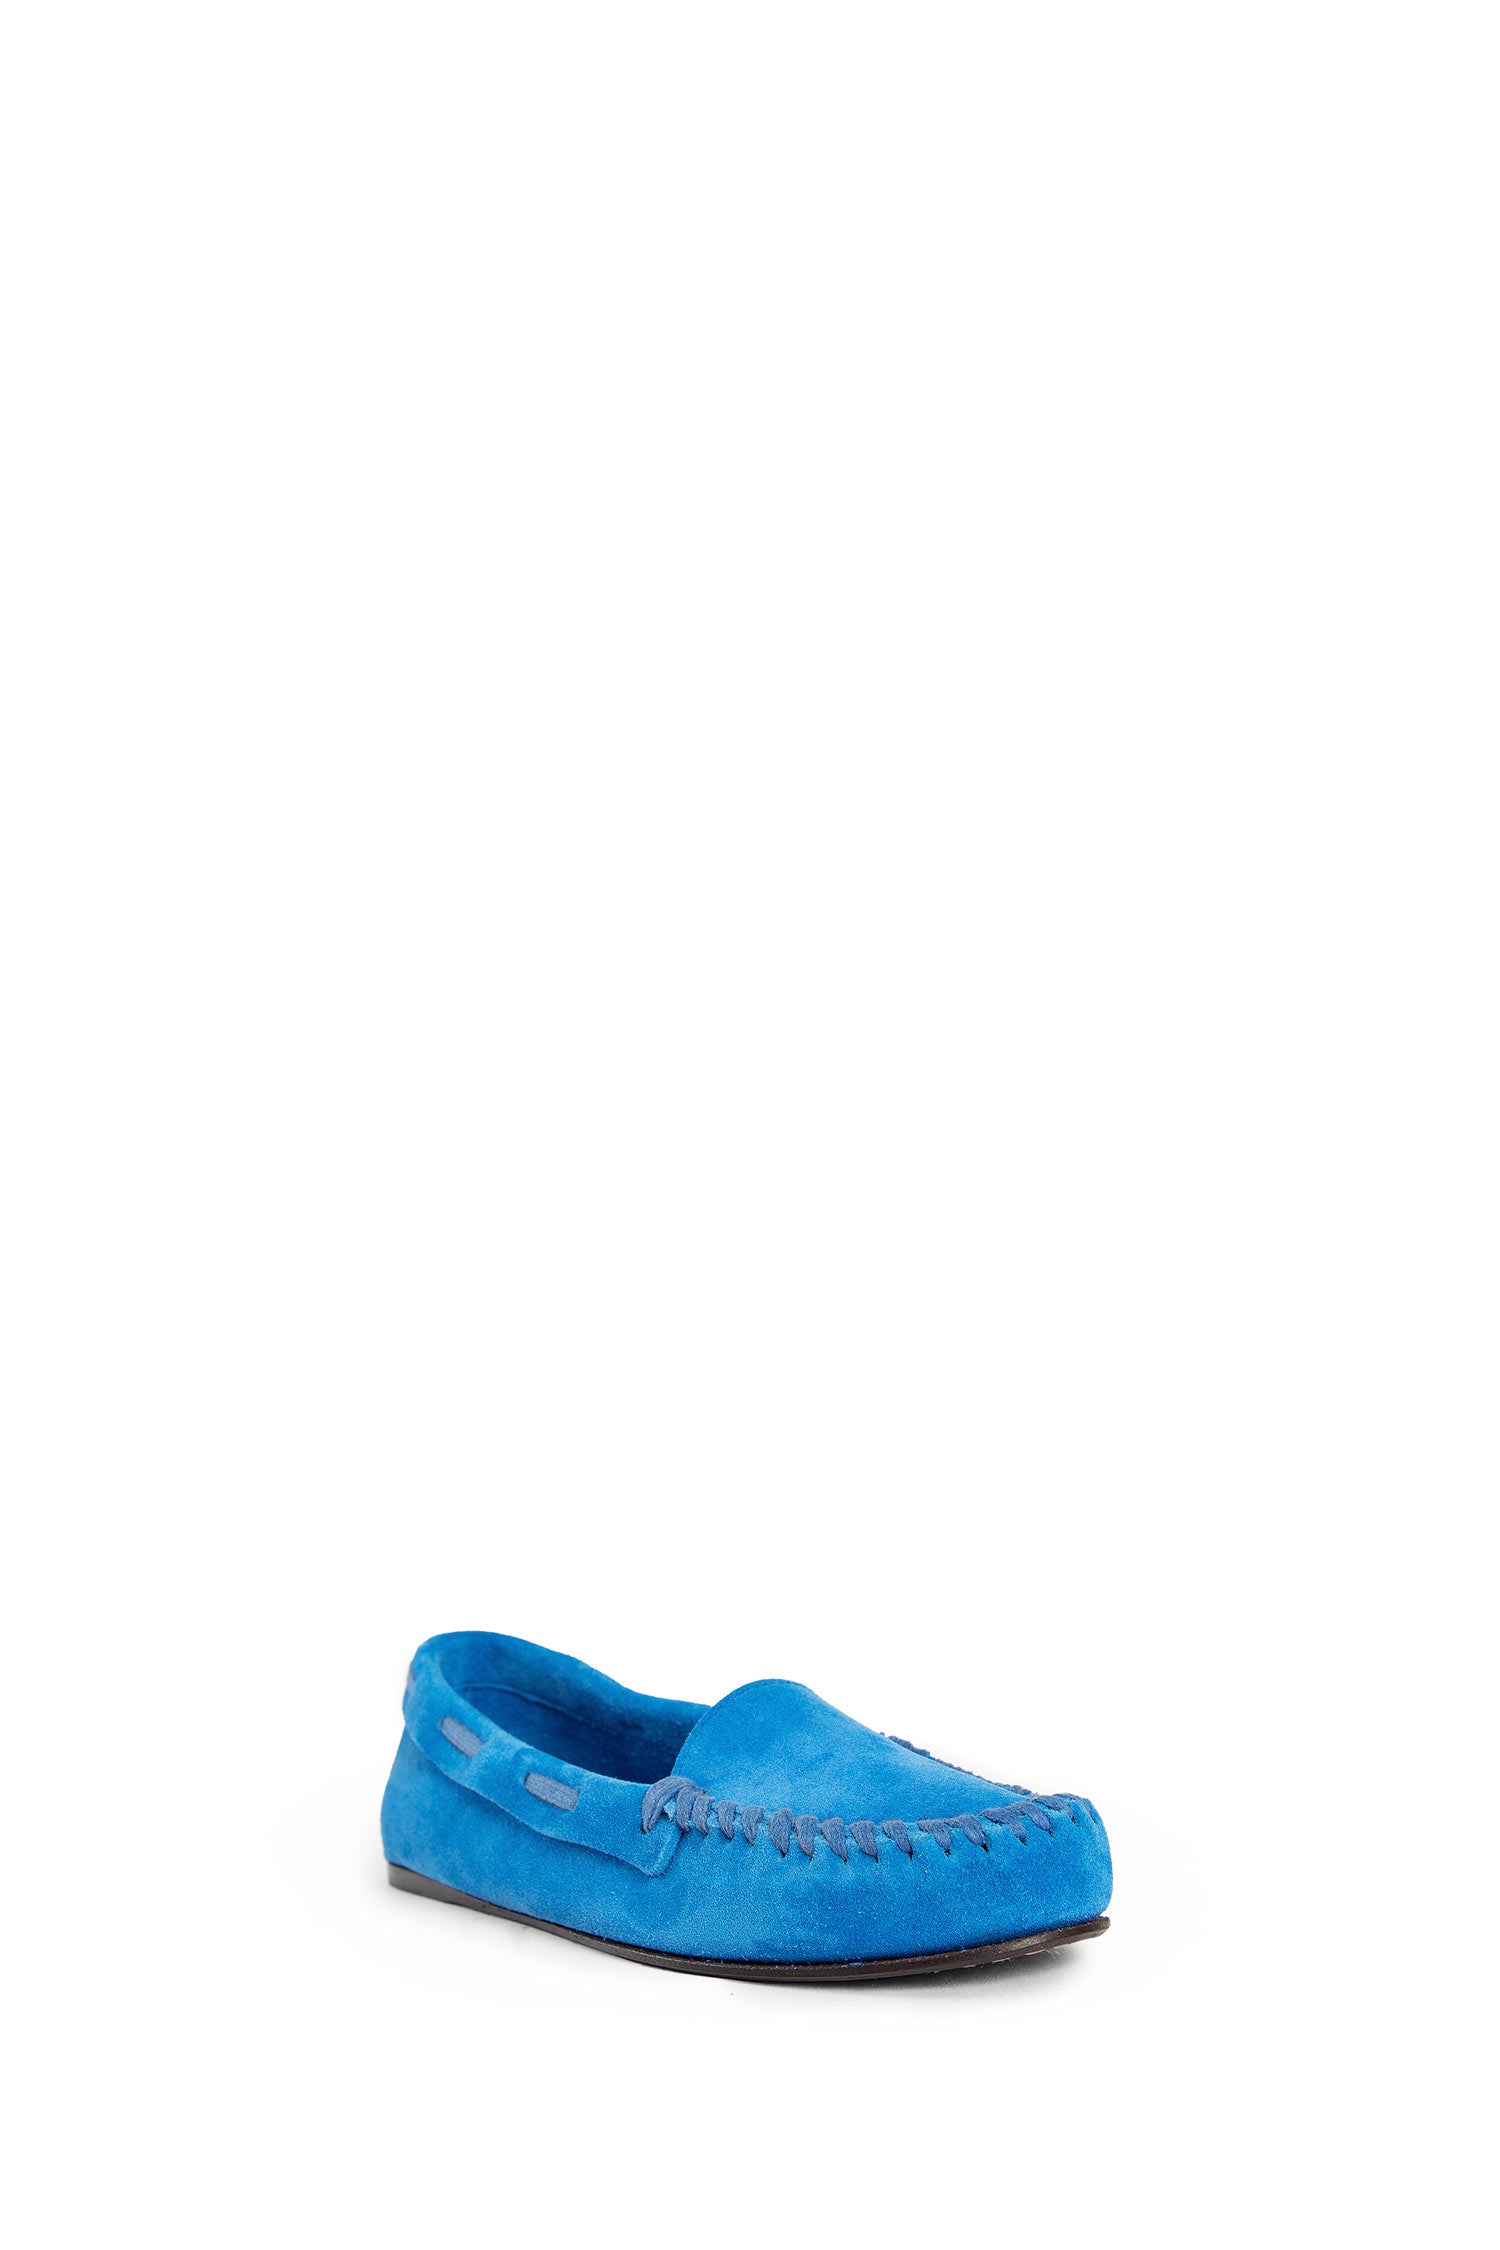 THE ROW WOMAN BLUE LOAFERS & FLATS